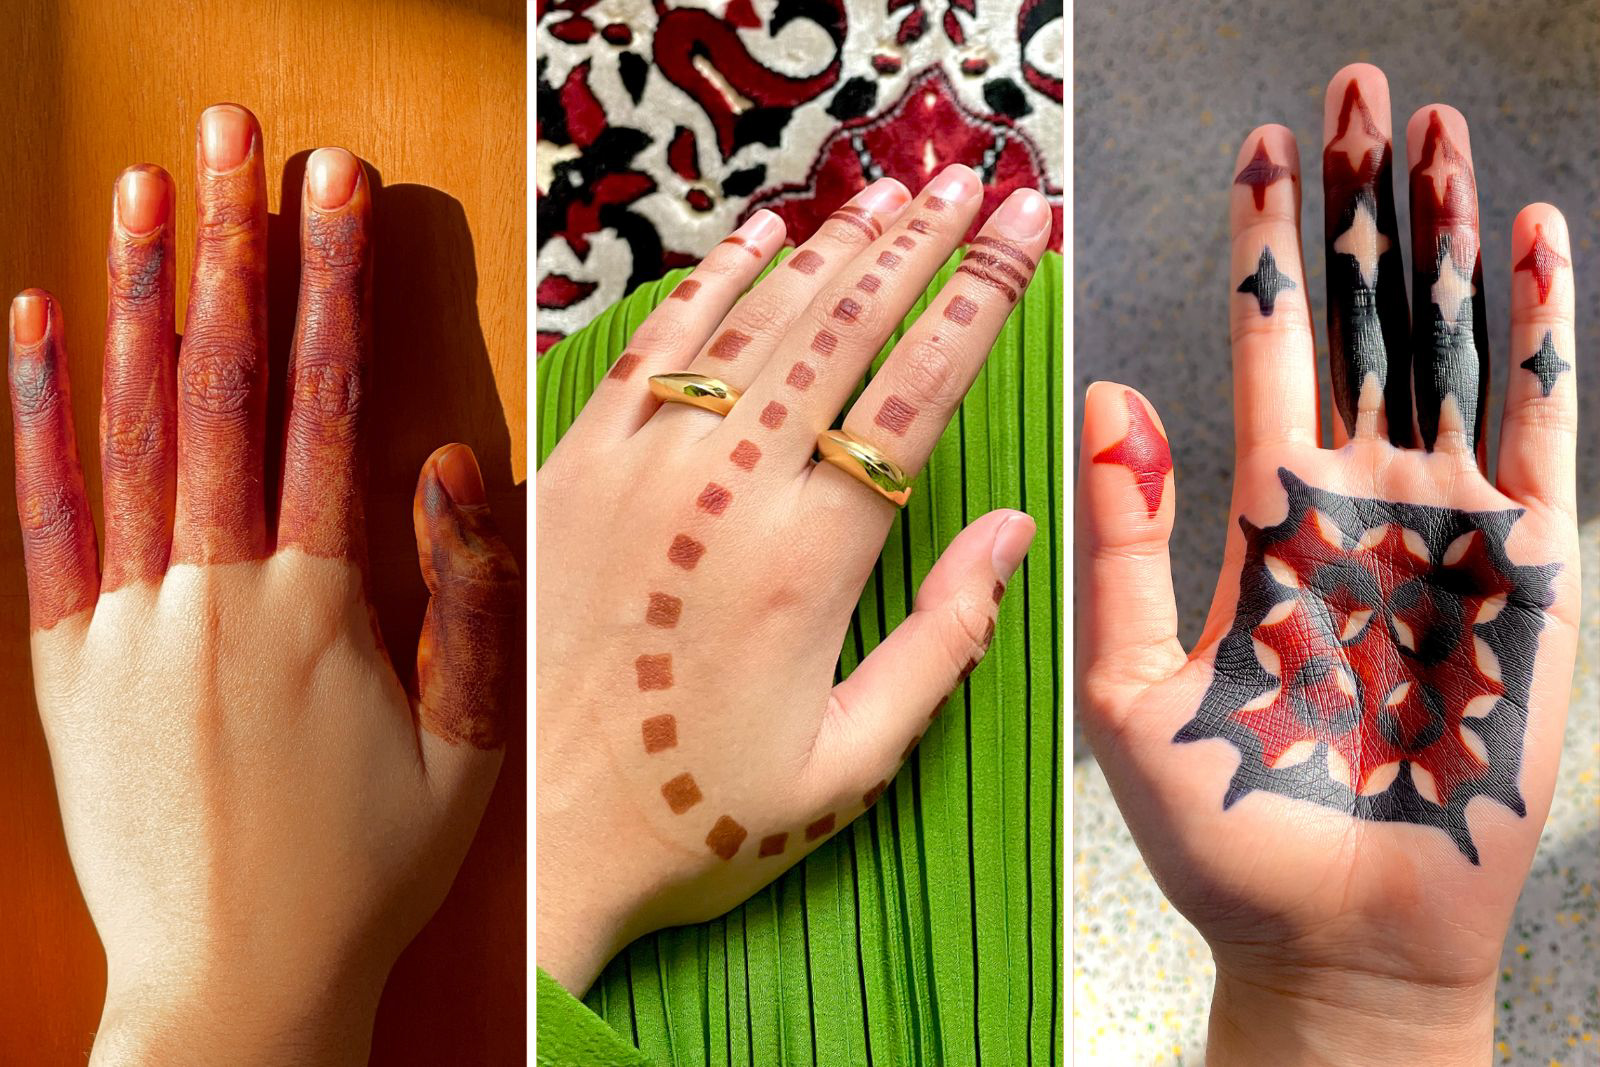 Henna isn’t just for Eid